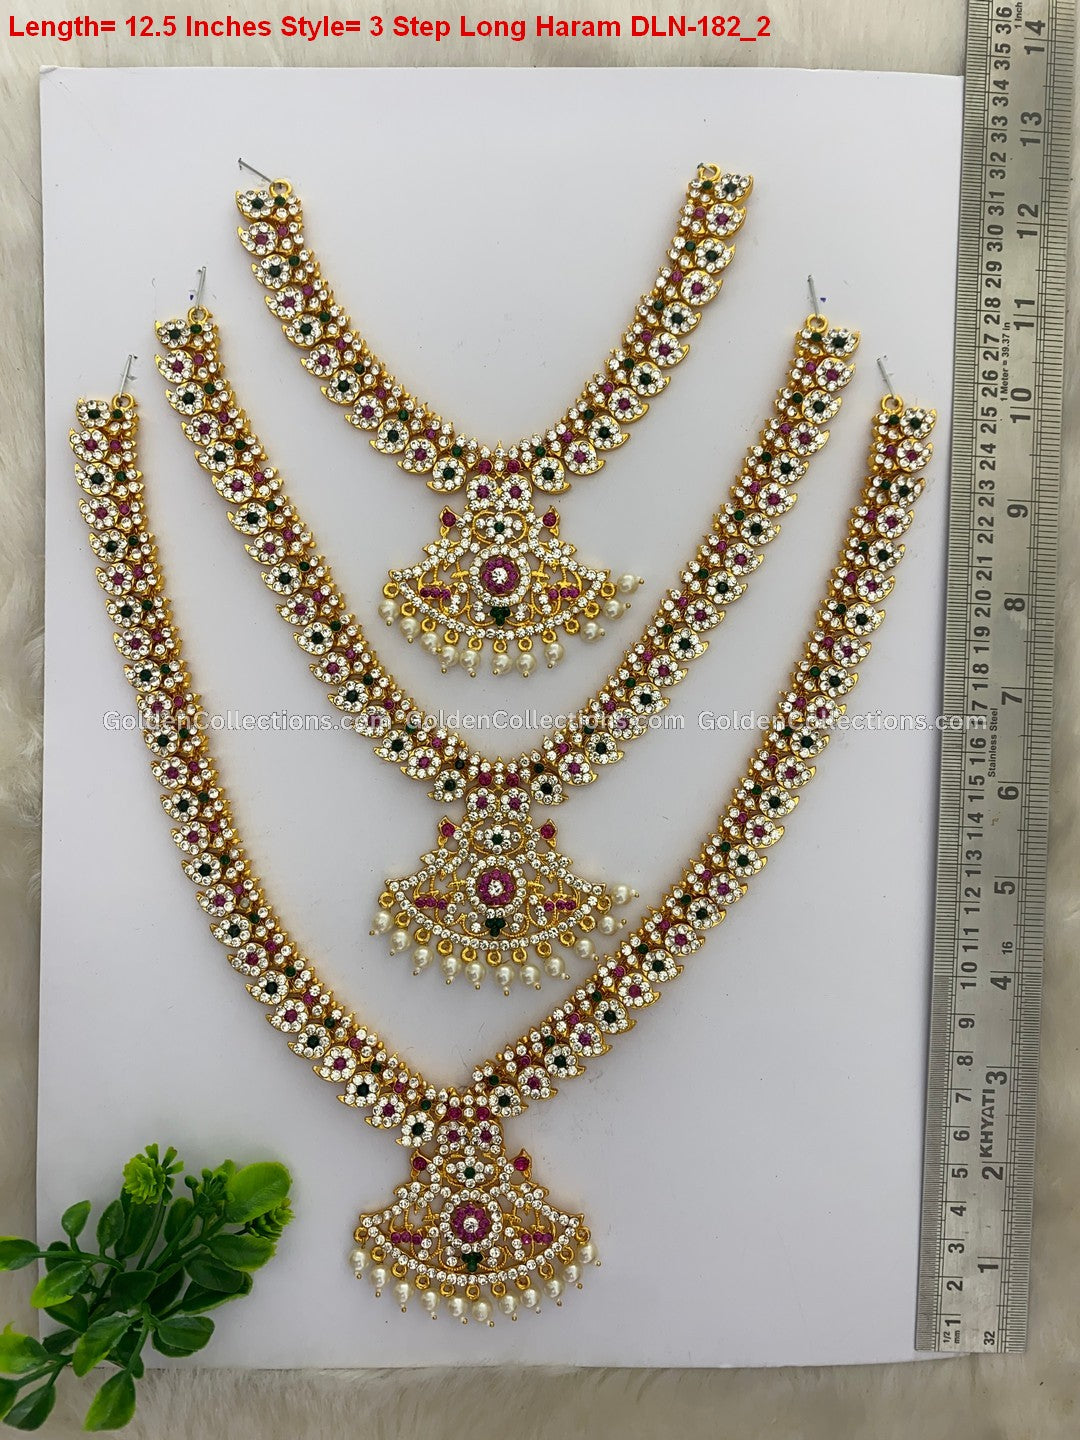 Traditional Goddess Lakshmi Necklace - GoldenCollections DLN-182 2